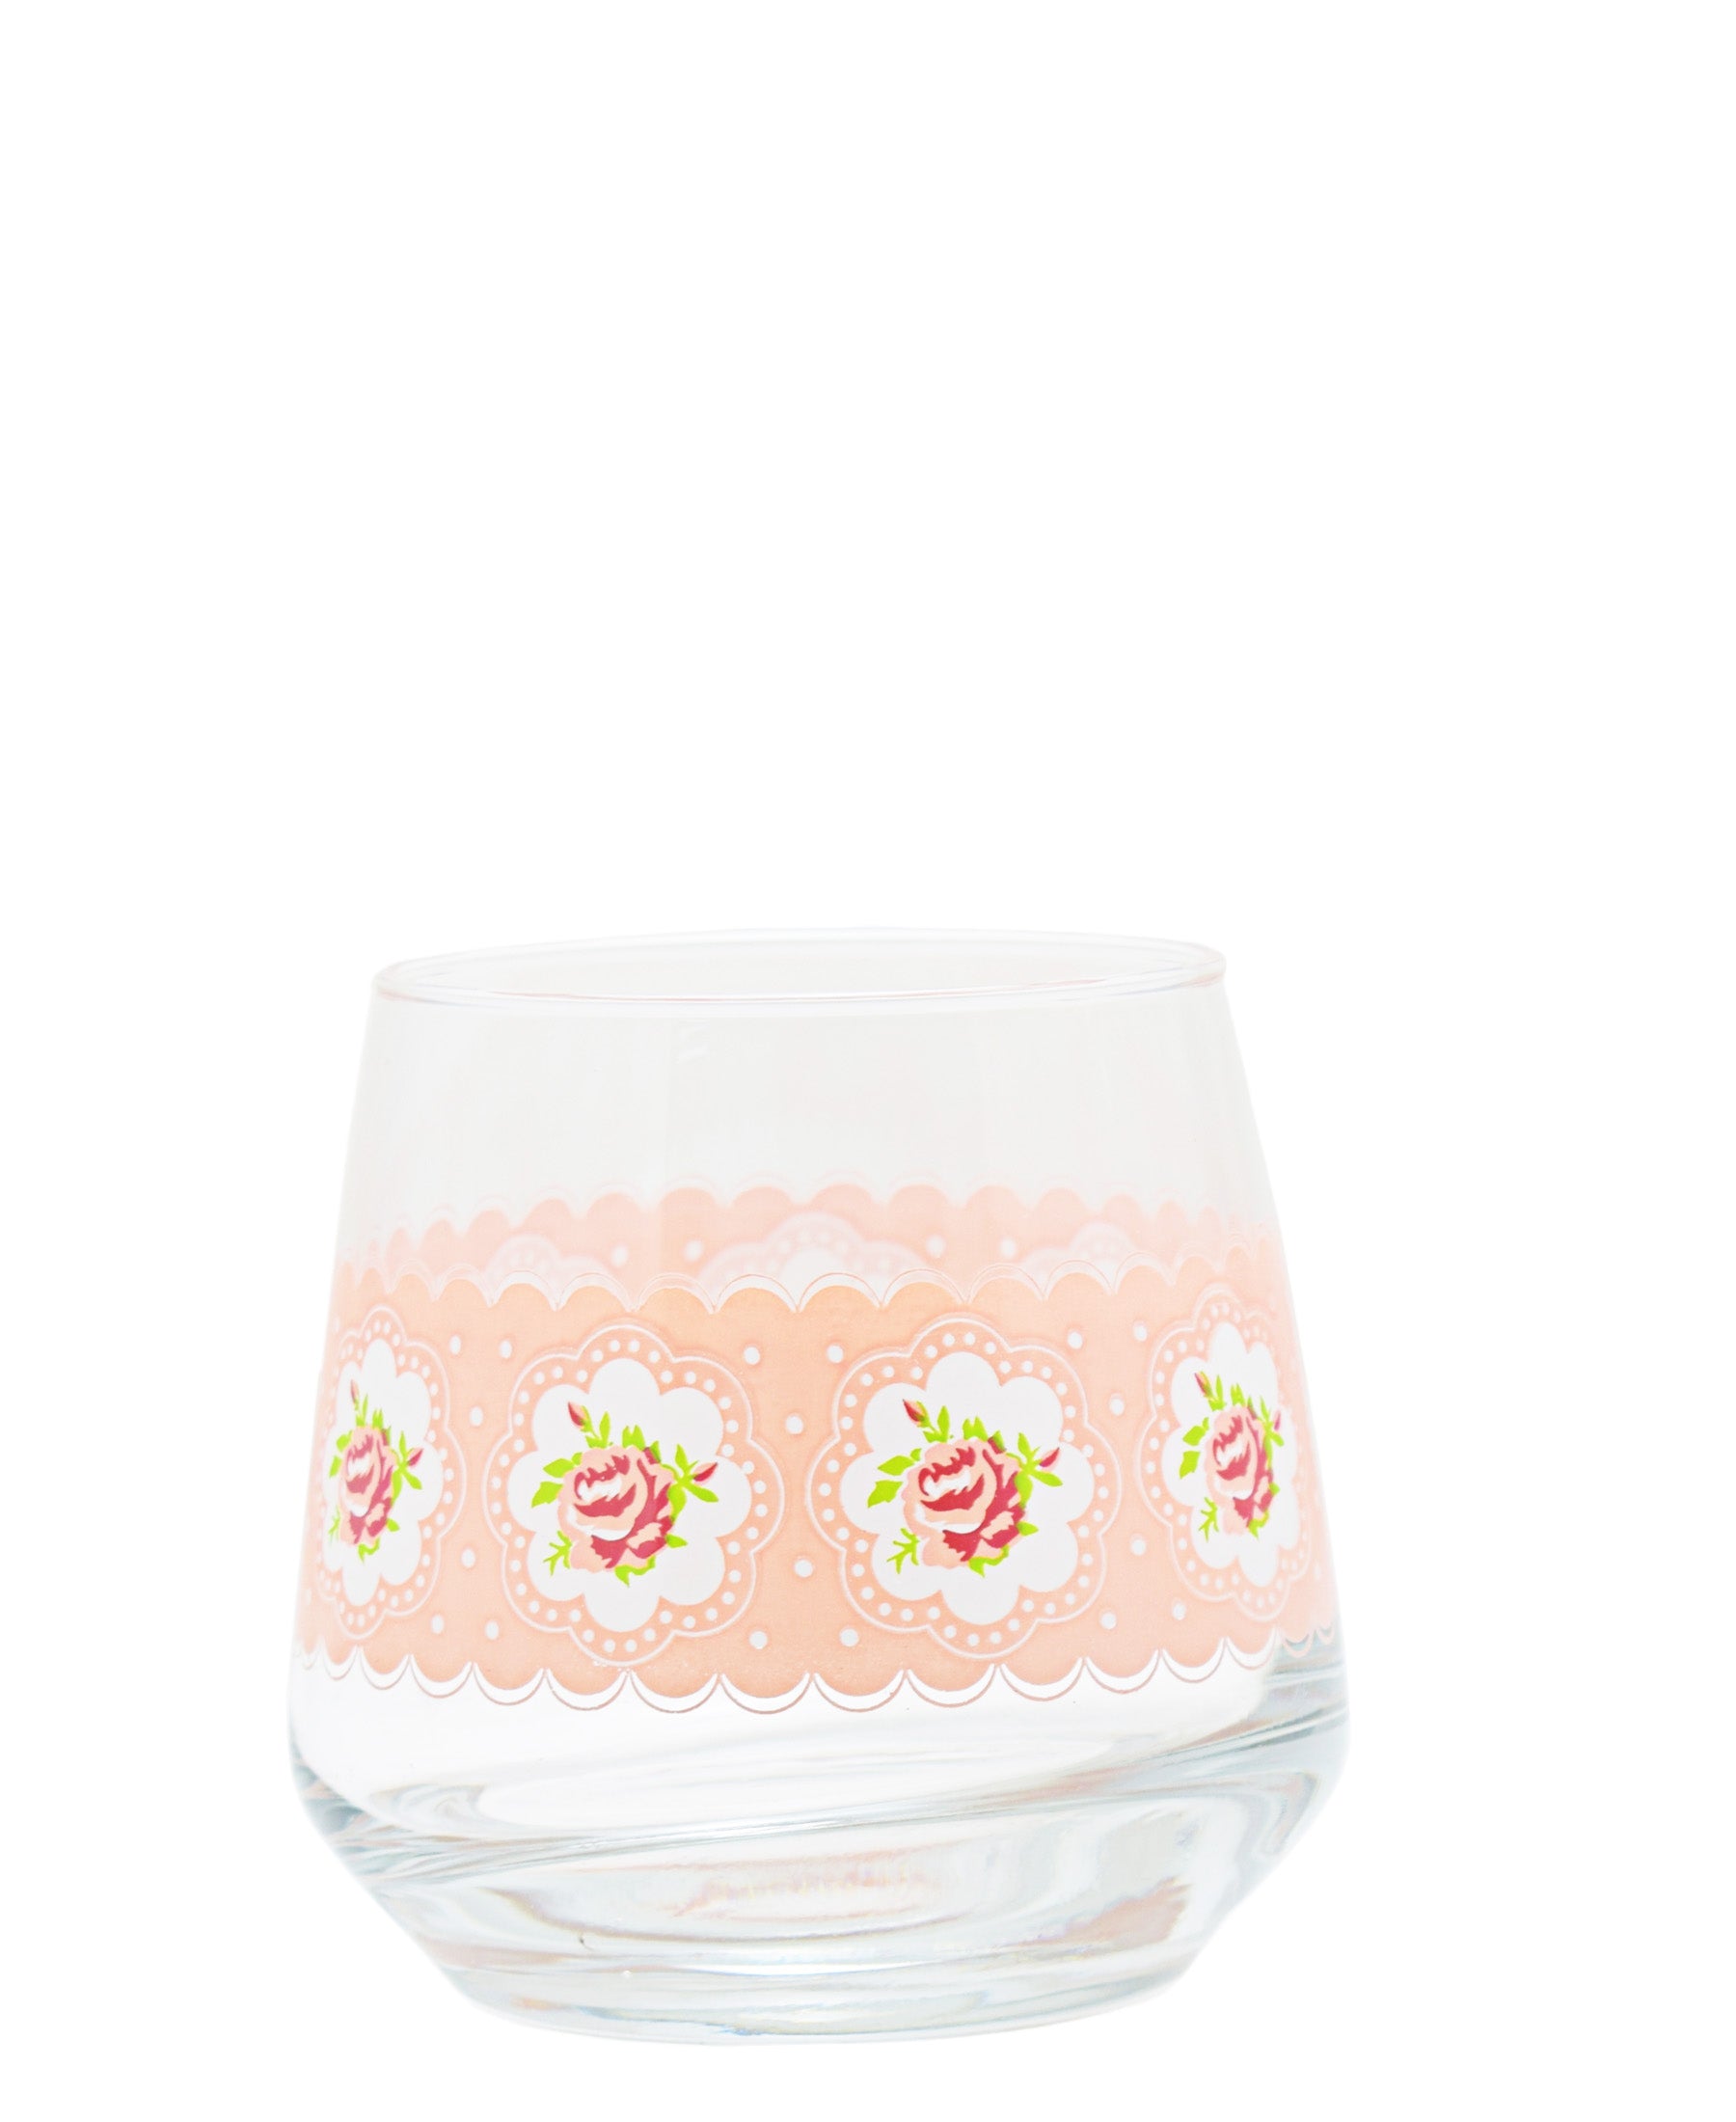 LAV 3 Piece Mona 345ml Whiskey Glass - Clear With Pink Print